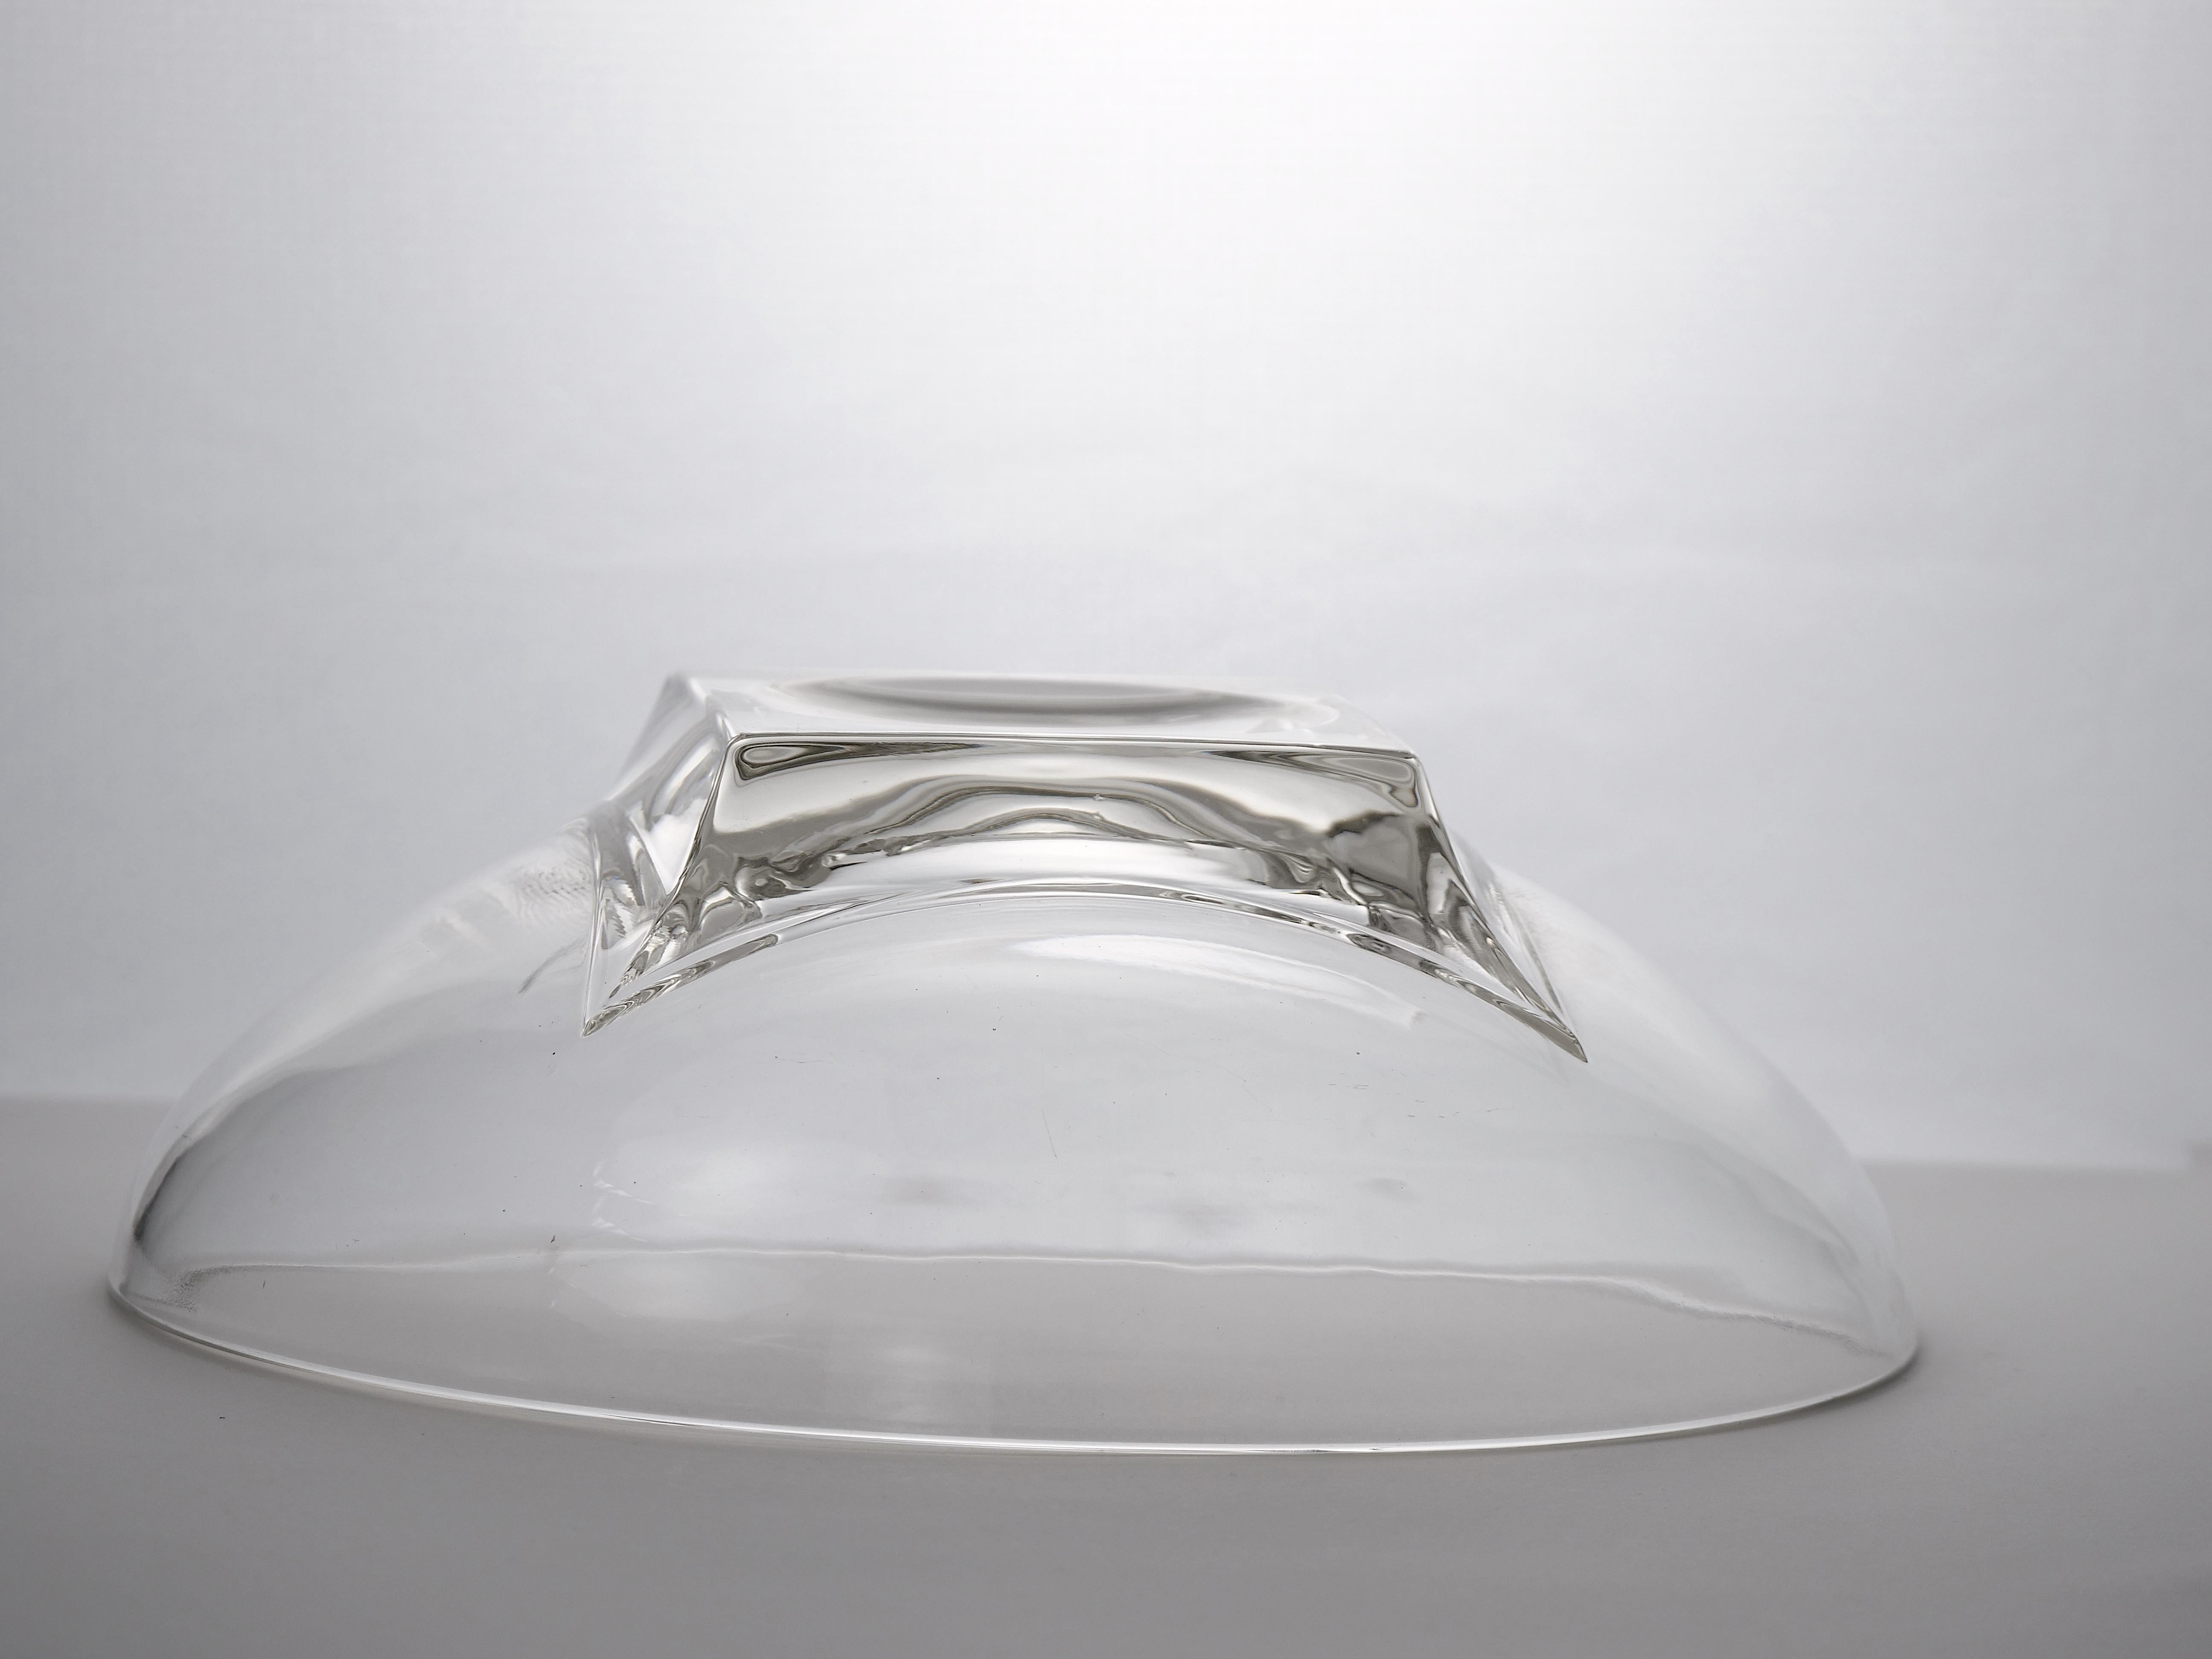 French Mid-Century Modern Art Deco Style Glass Centerpiece Bowl For Sale 2